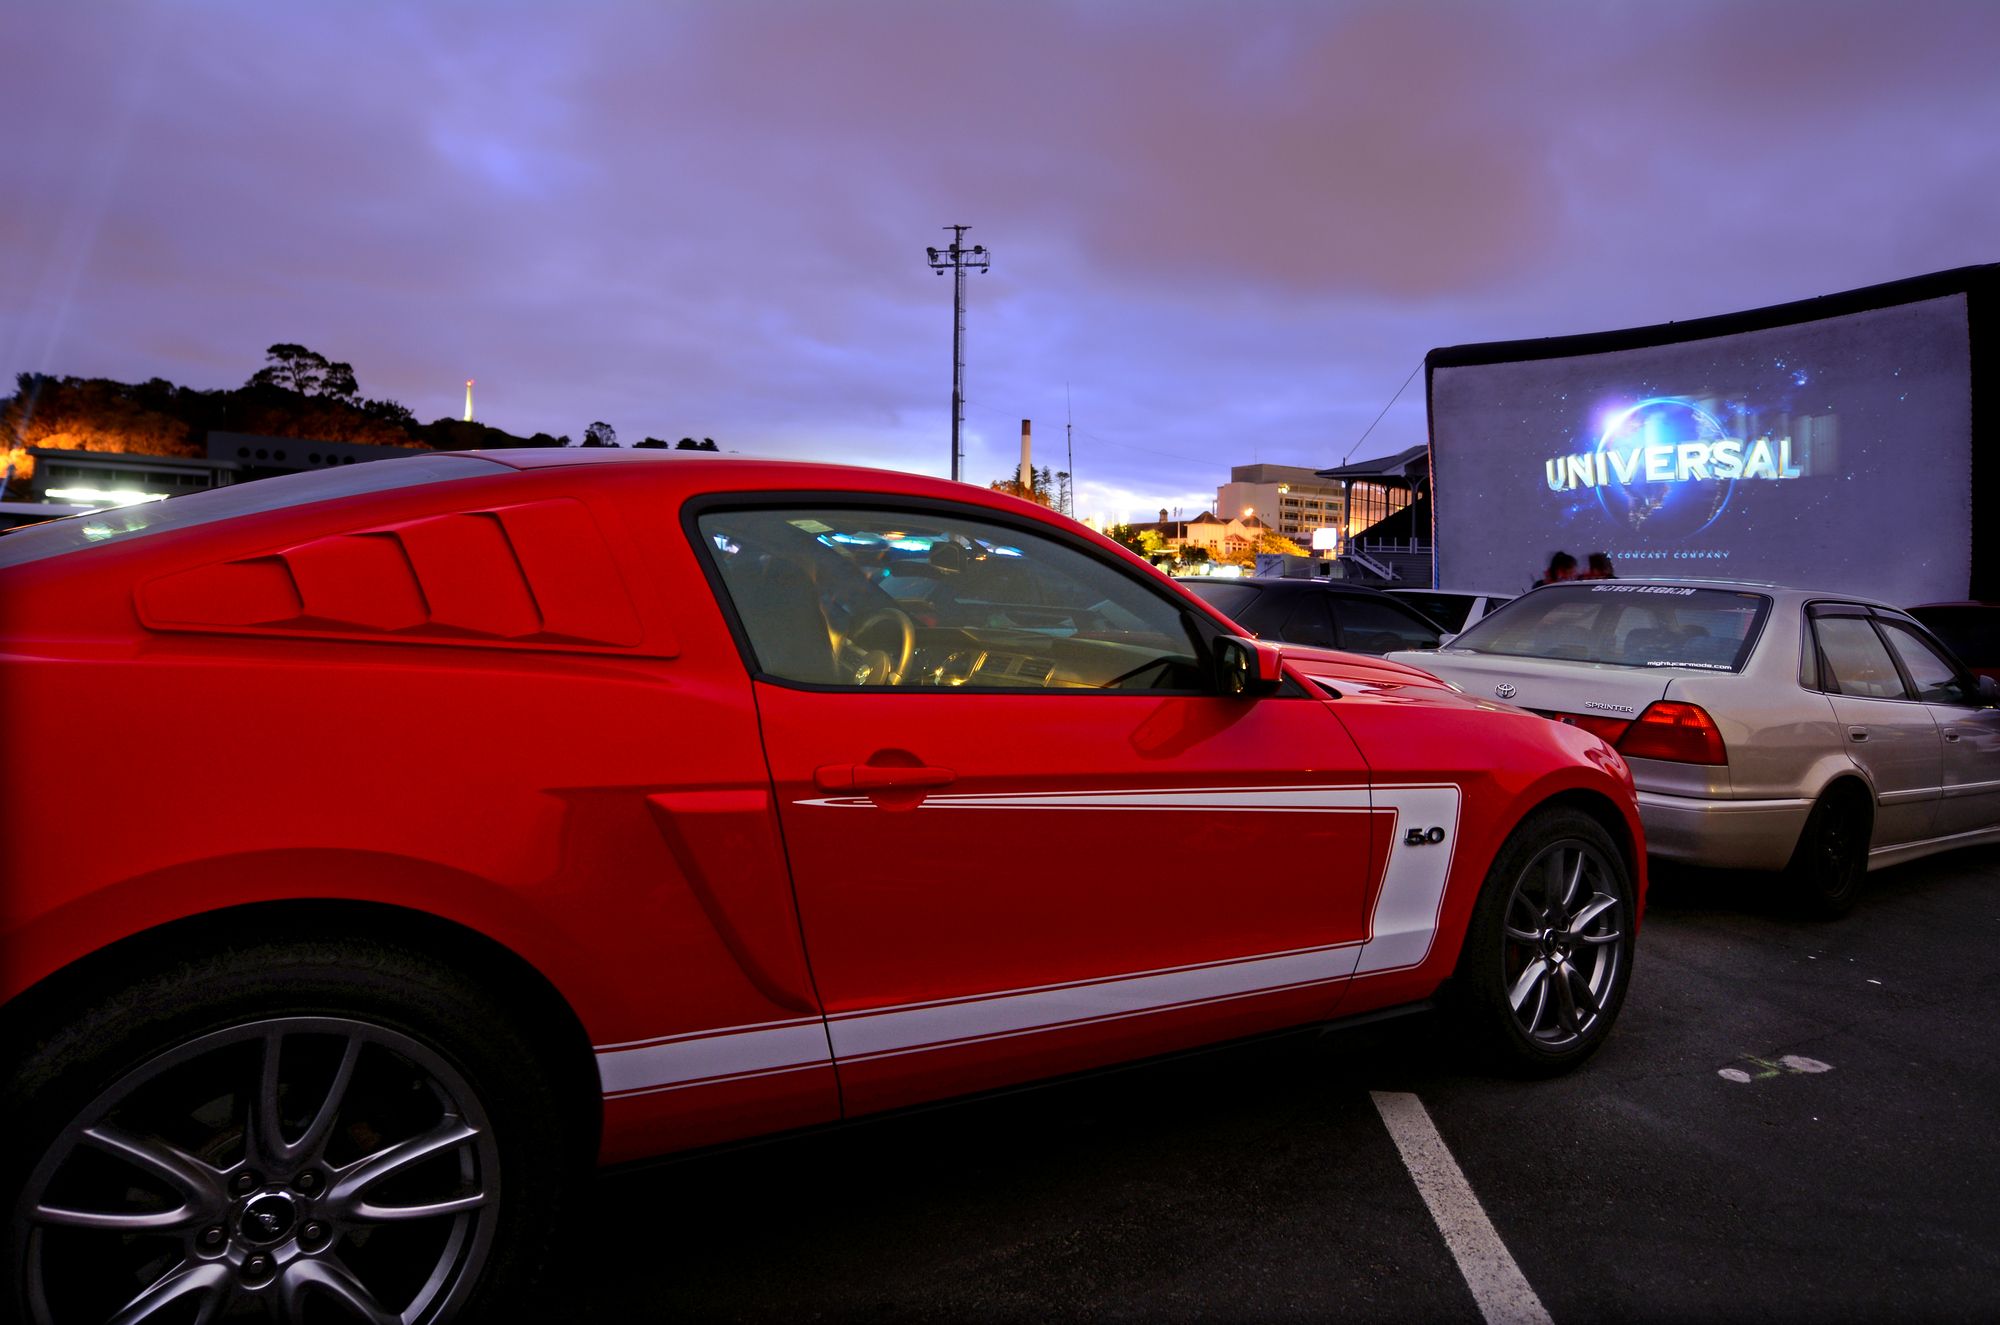 The History Of Drive-In Movies